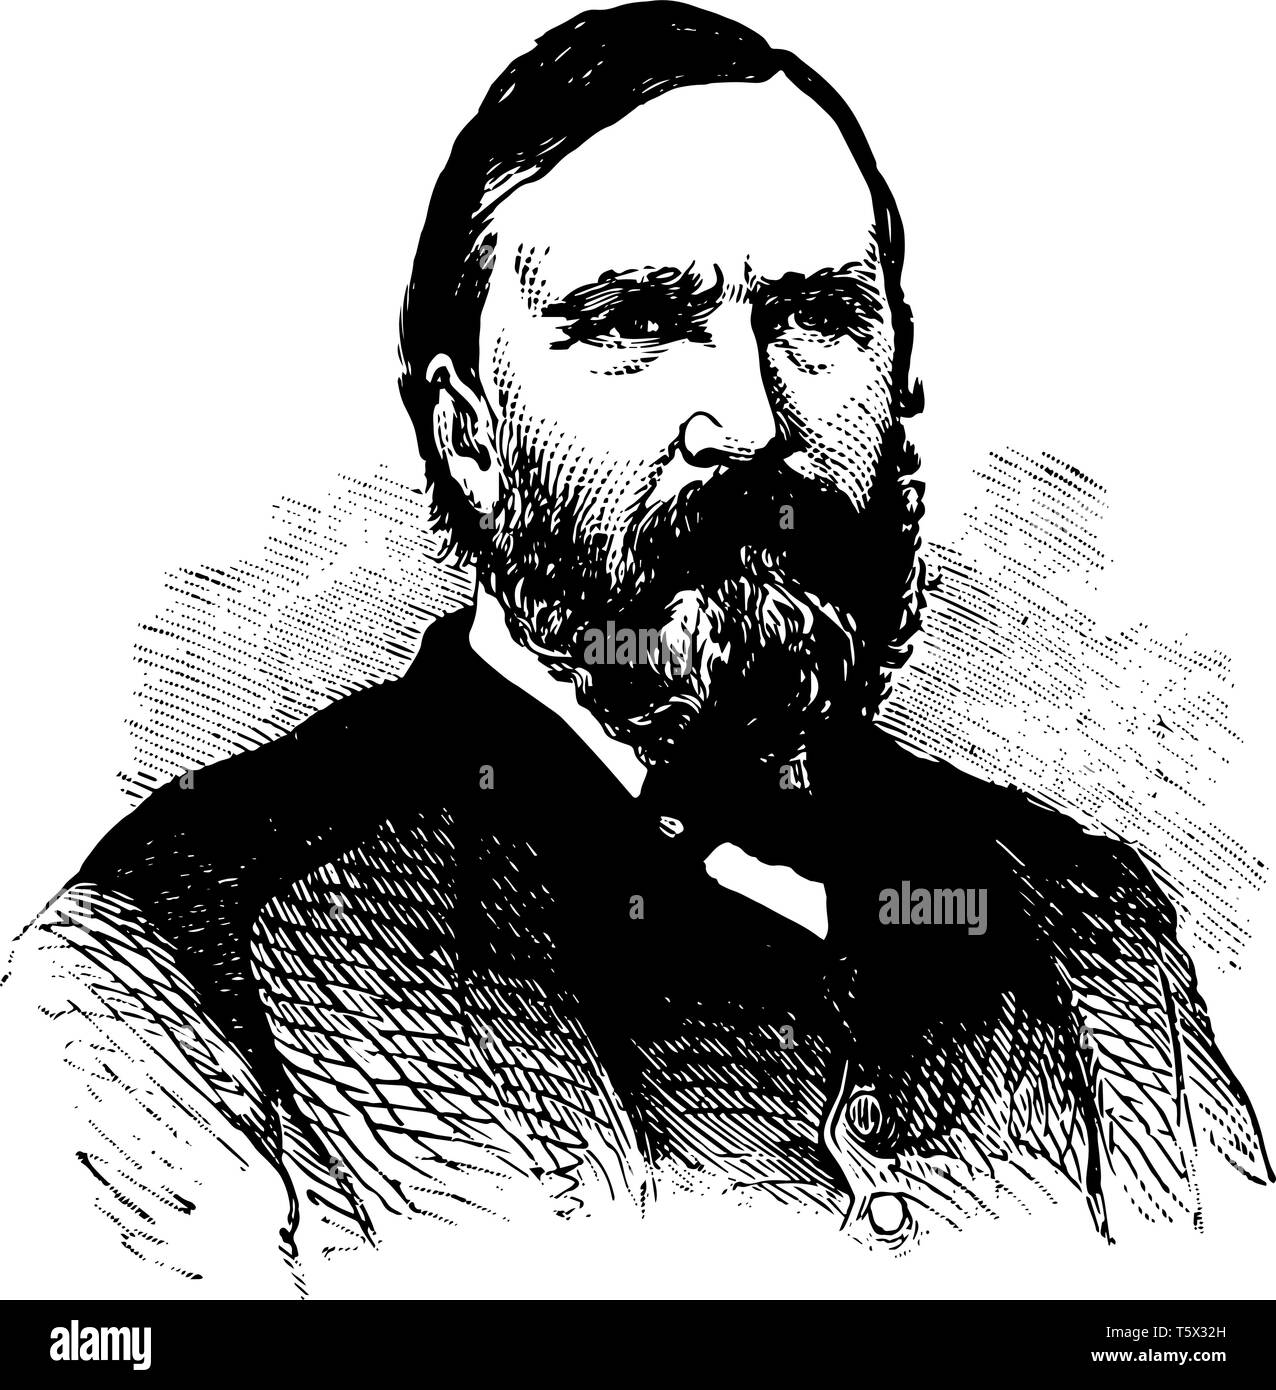 James Longstreet 1821 to 1904 he was one of the foremost confederate generals of the American civil war vintage line drawing or engraving illustration Stock Vector